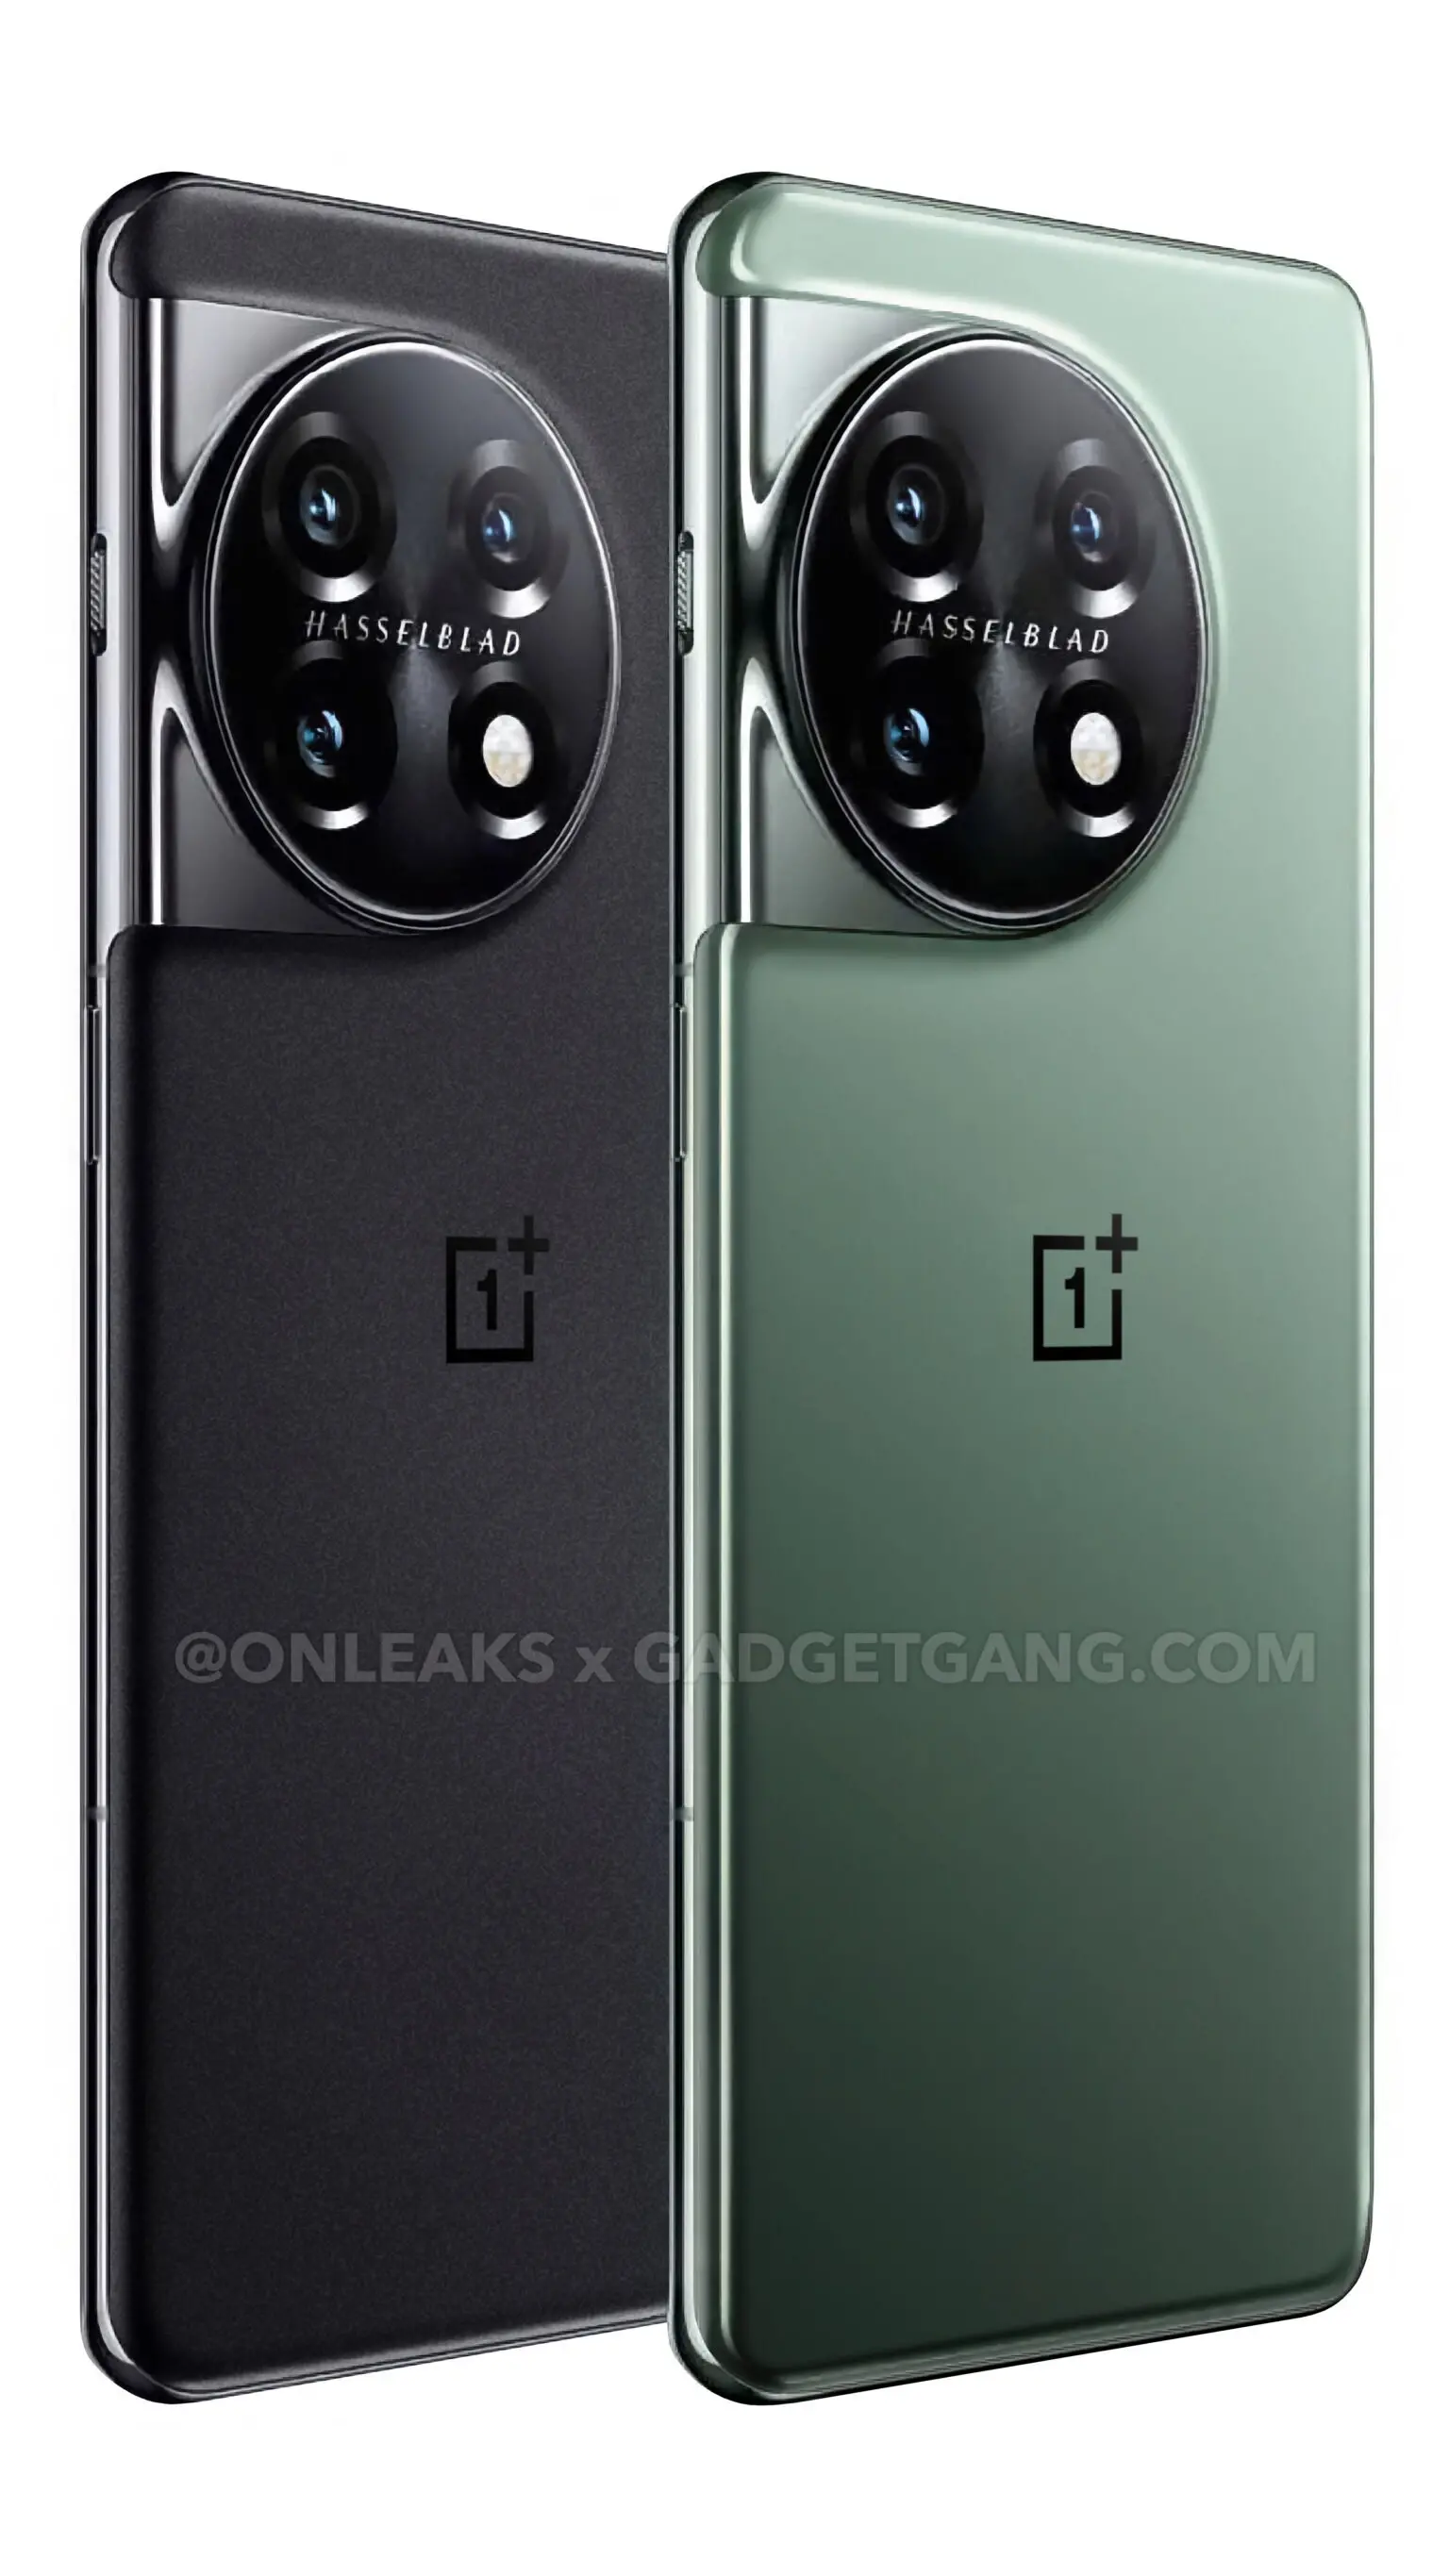 (Image Credit — OnLeaks and GadgetGang) Leaked photo of the OnePlus 11 in two color versions - OnePlus 11 colors: what to expect